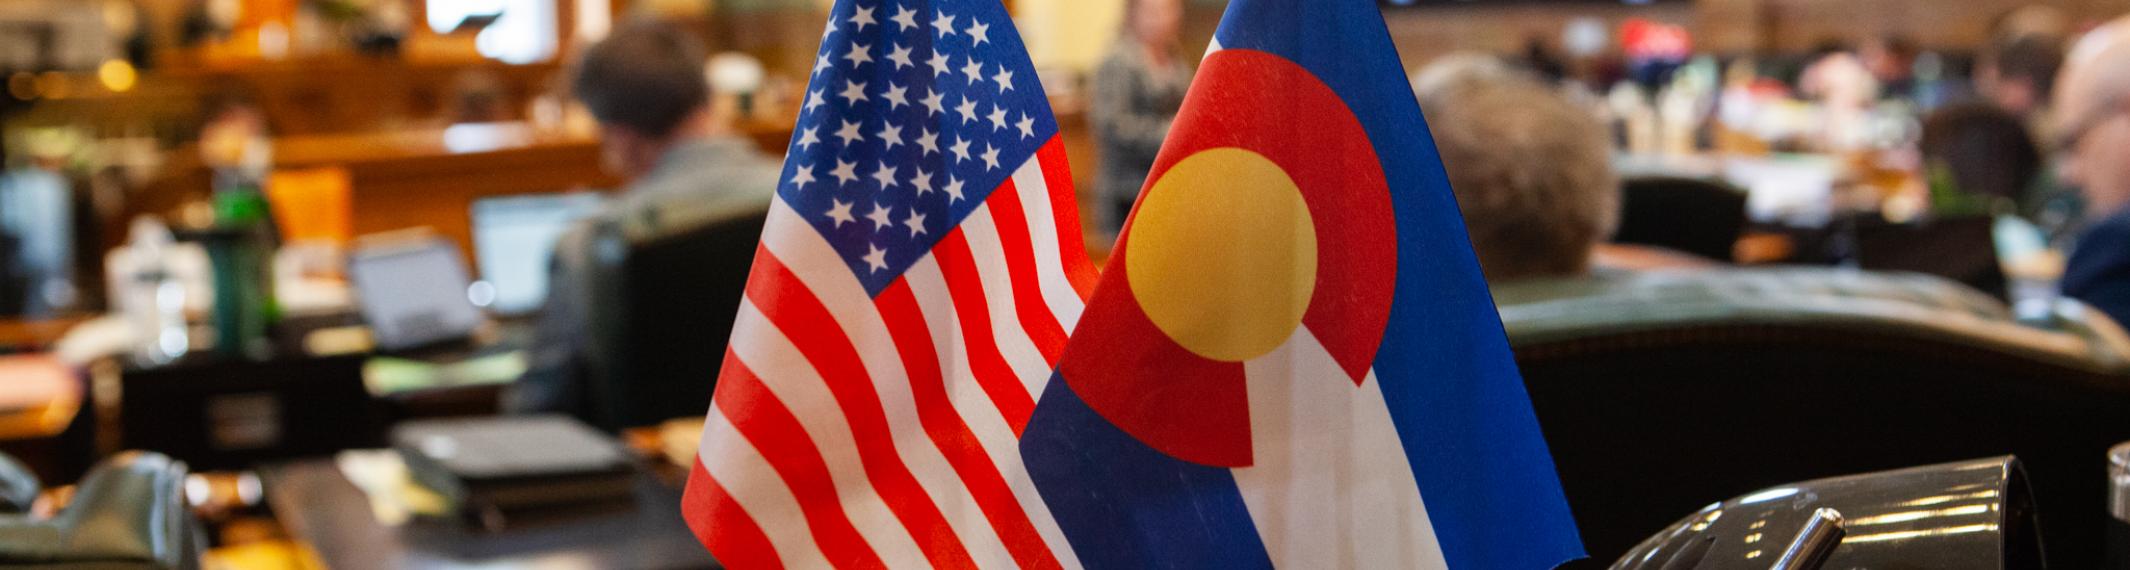 Flags on a desk in the Colorado House of Representatives chamber